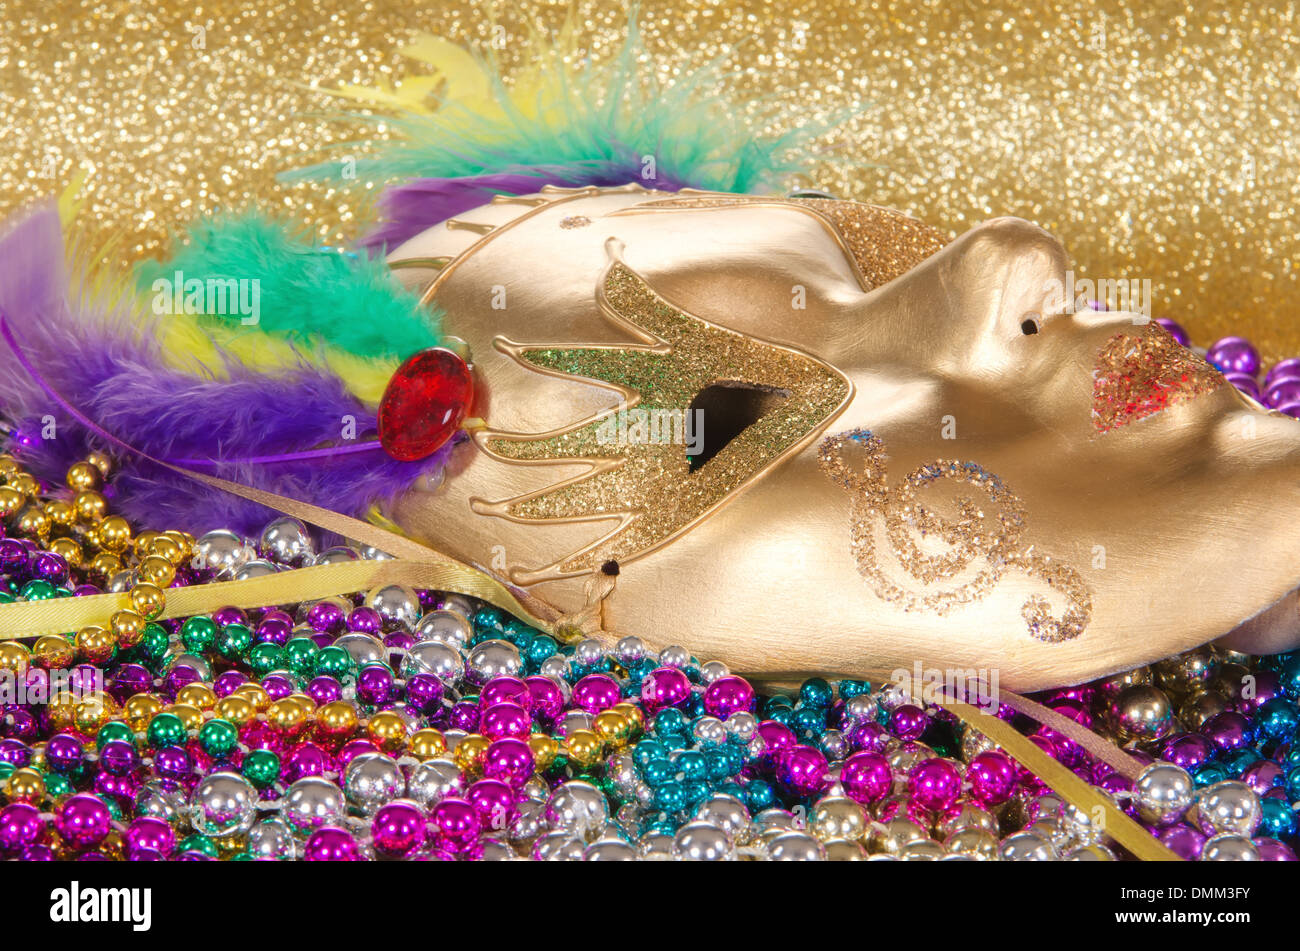 Festive Mardi Gras beads and a golden mask Stock Photo